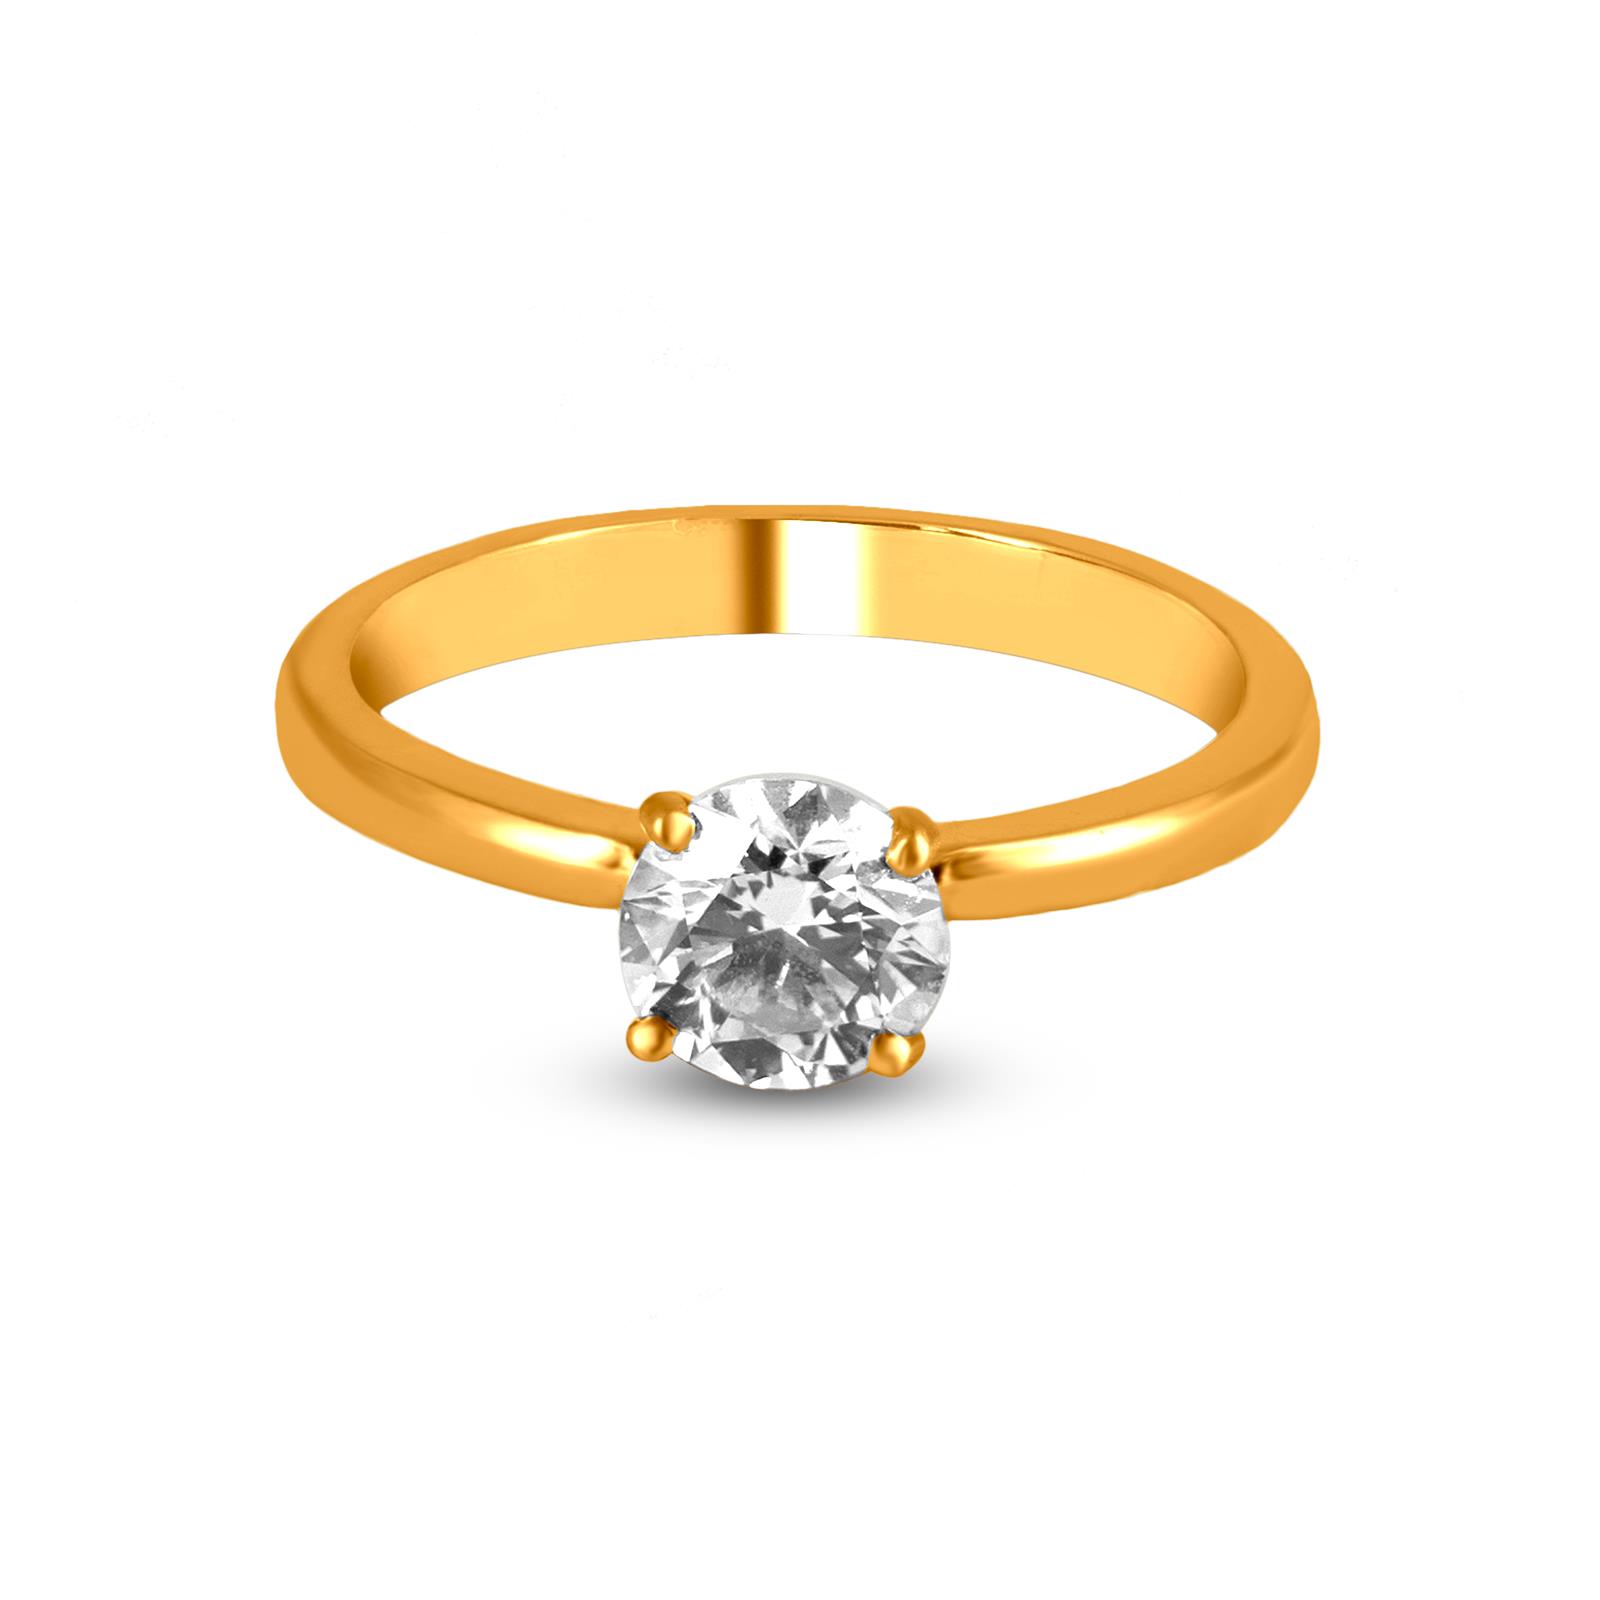 Buy Candere by Kalyan Jewellers 18KT White Gold and Diamond Ring for Women  at Amazon.in